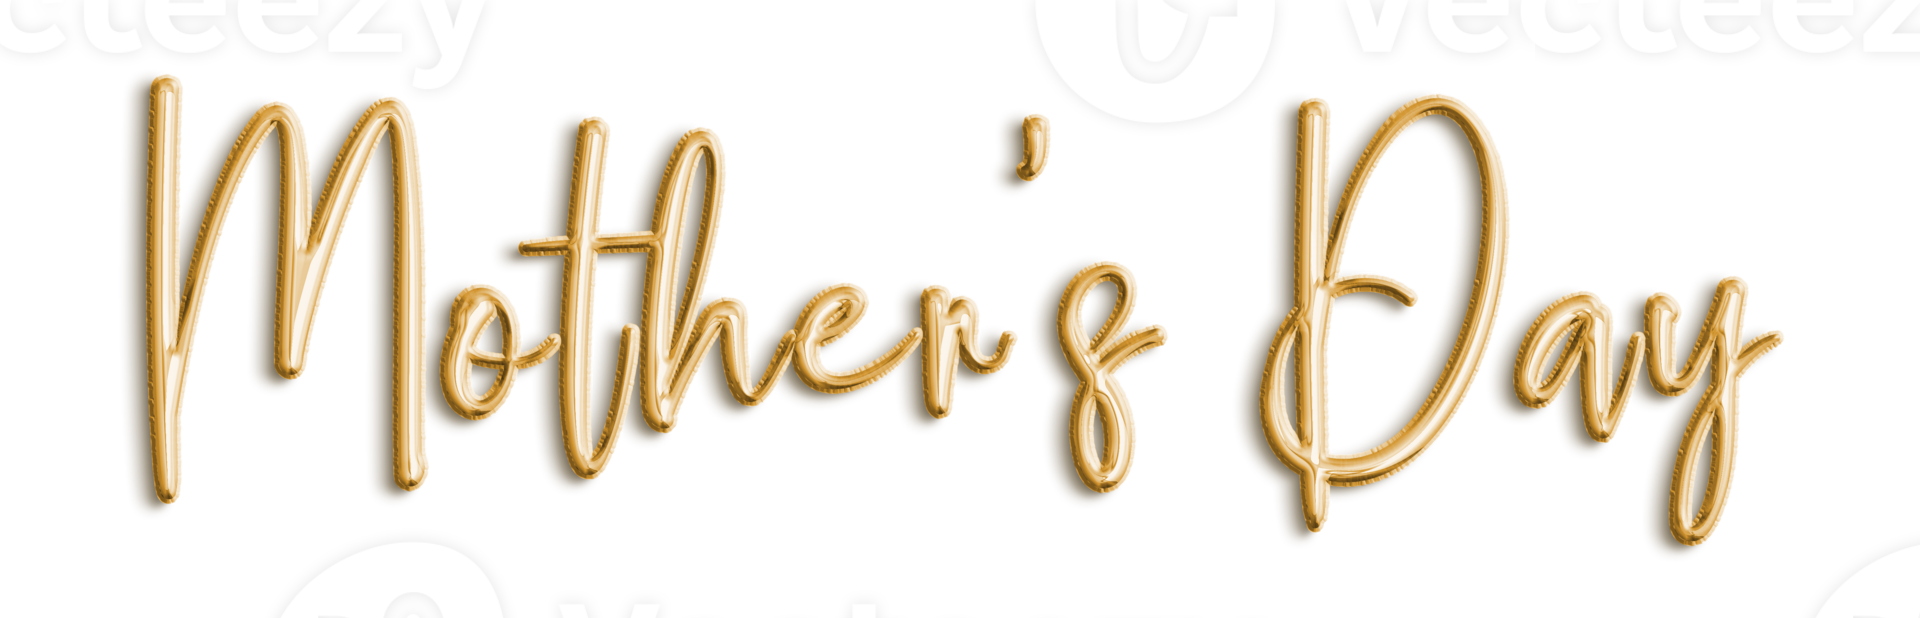 Golden Volumetric 3D Text Balloons Lettering Mothers Day cut out png